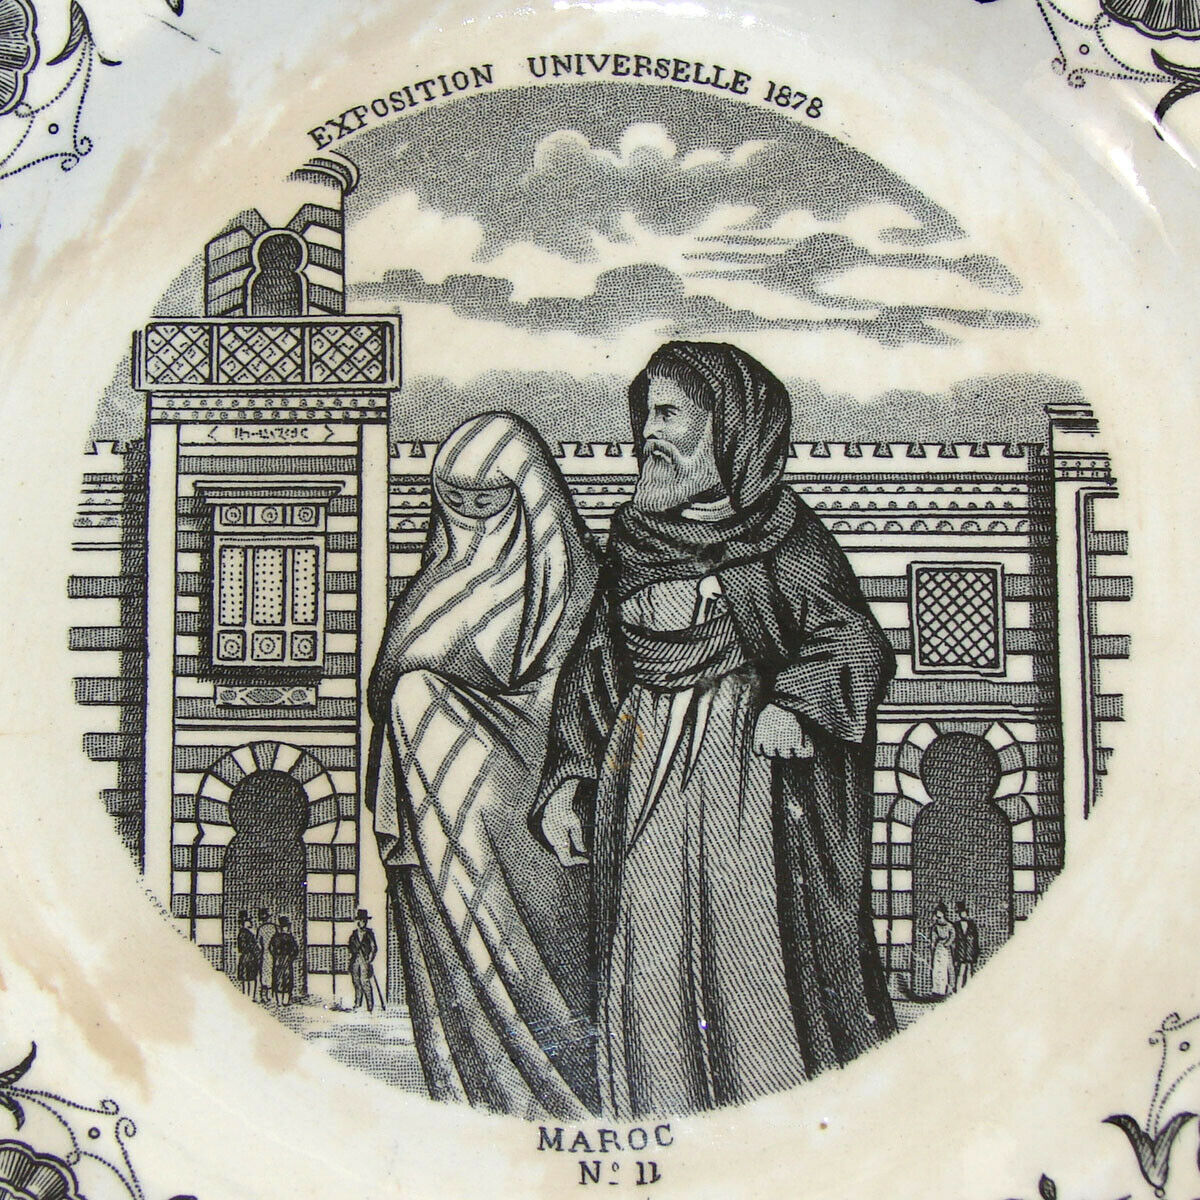 Antique French Cabinet Plate Pair, Souvenirs of “Exposition Universelle 1878"